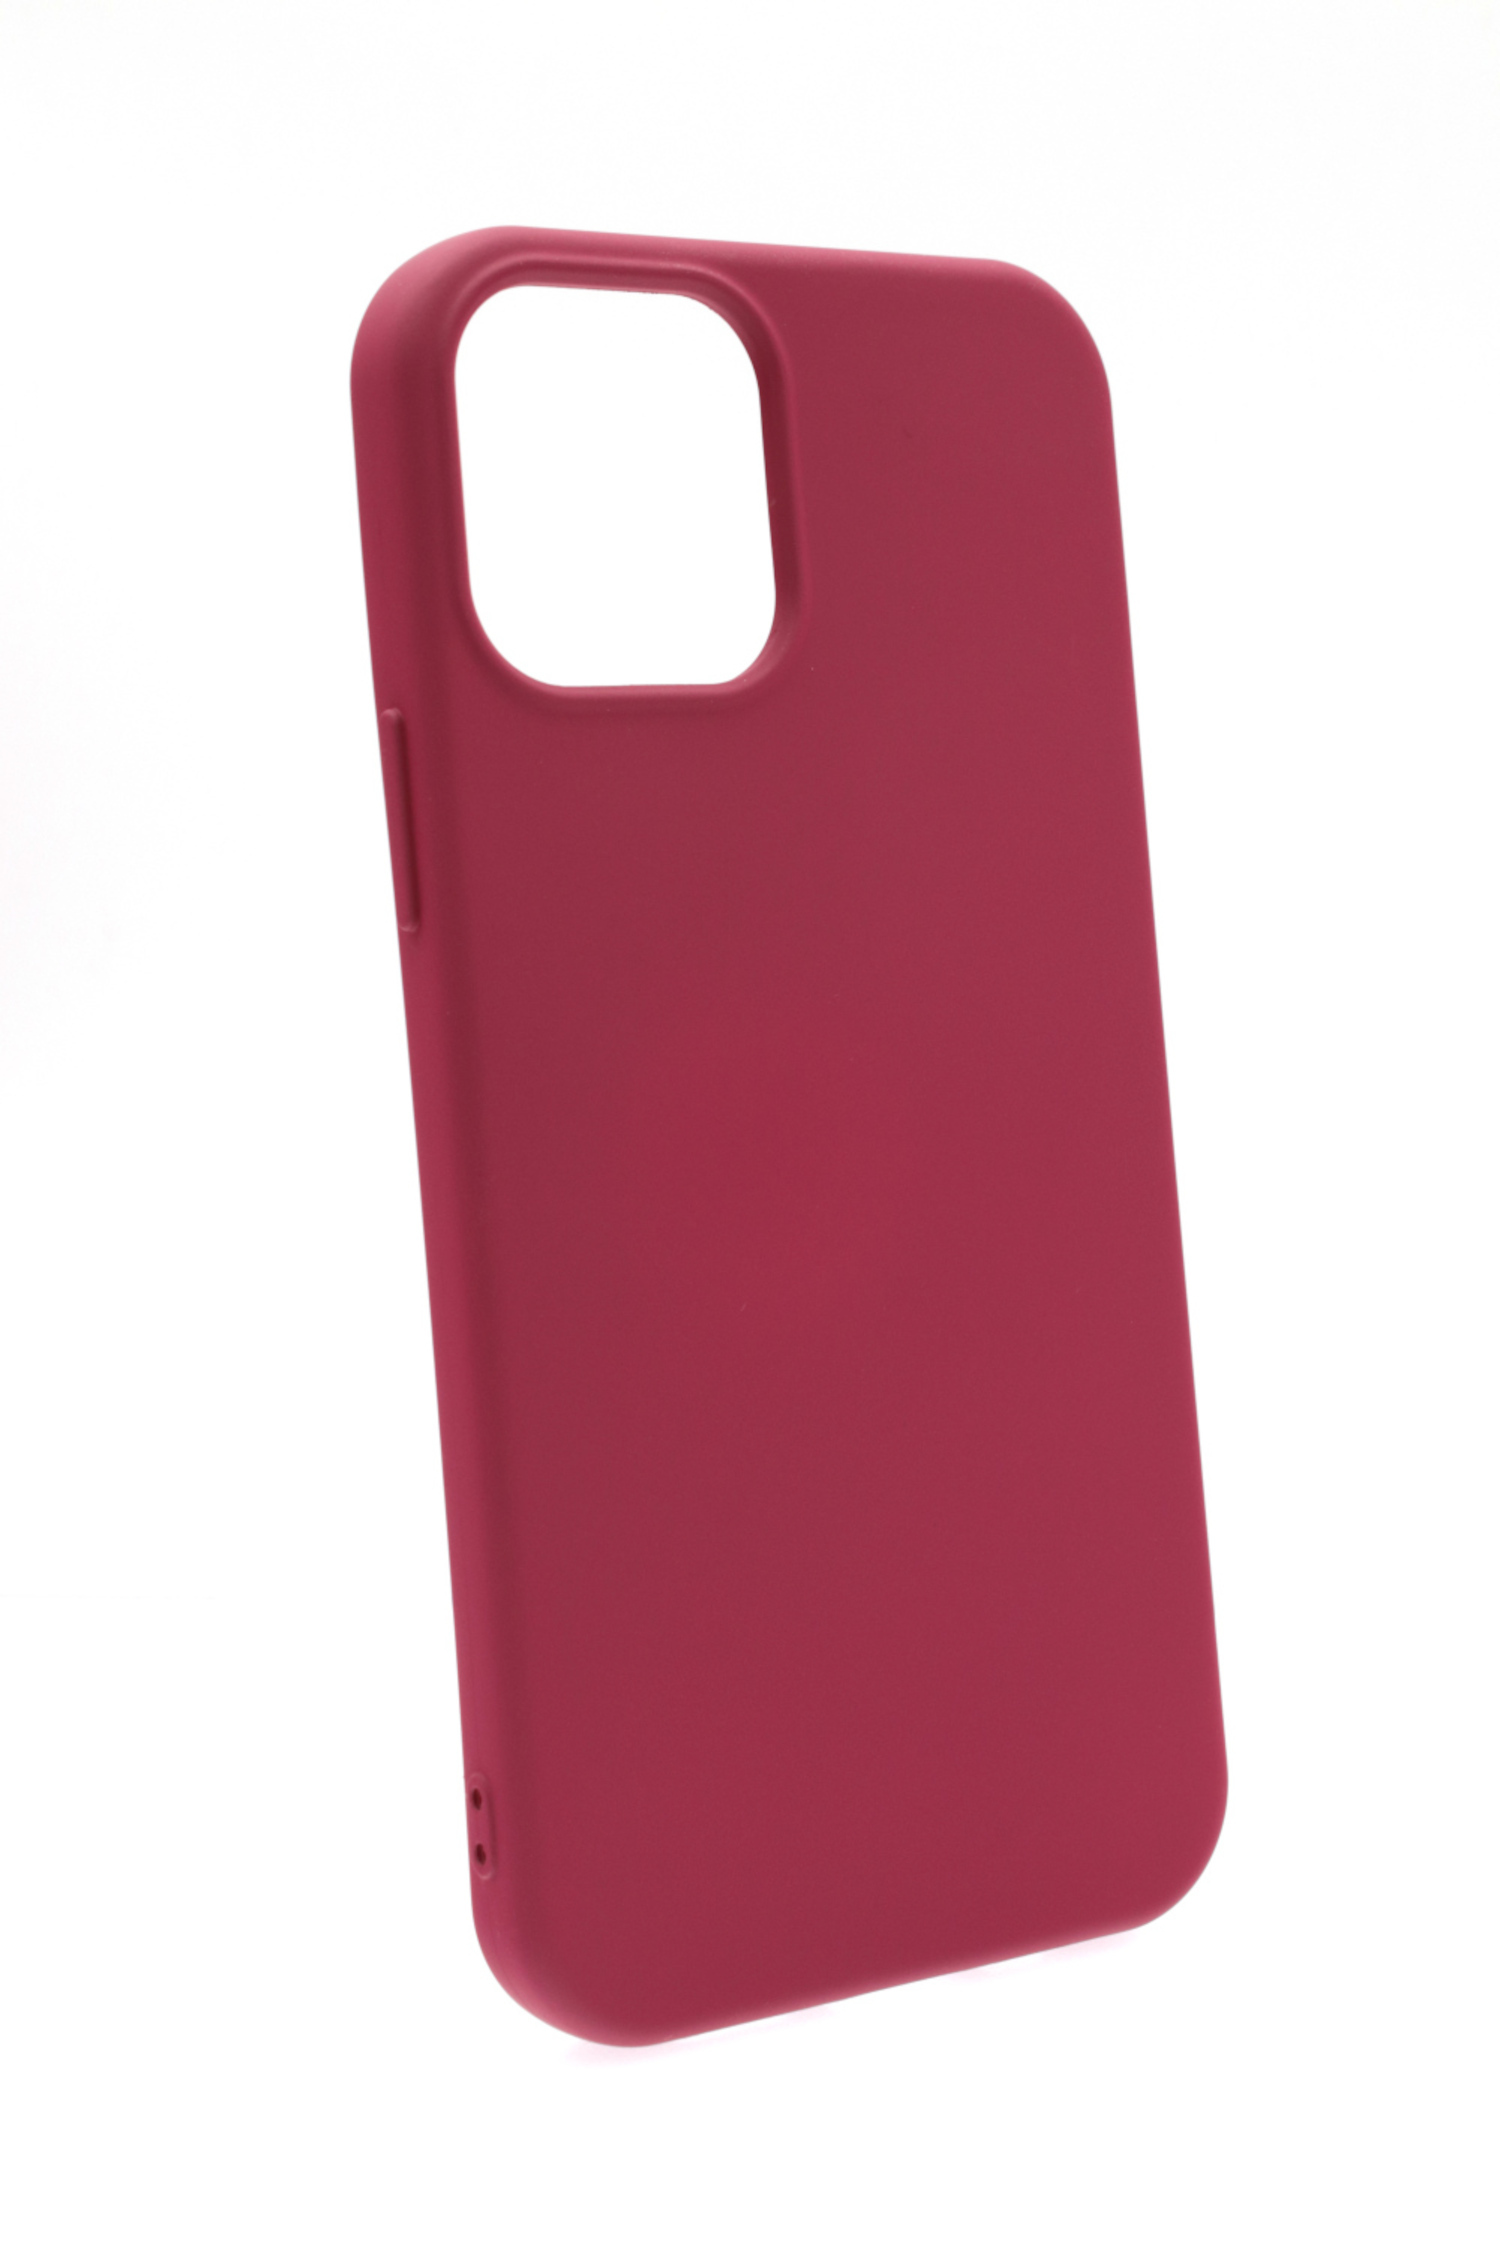 Backcover, iPhone iPhone Maroon Case, Pro, Silikon 12 JAMCOVER Apple, 12,